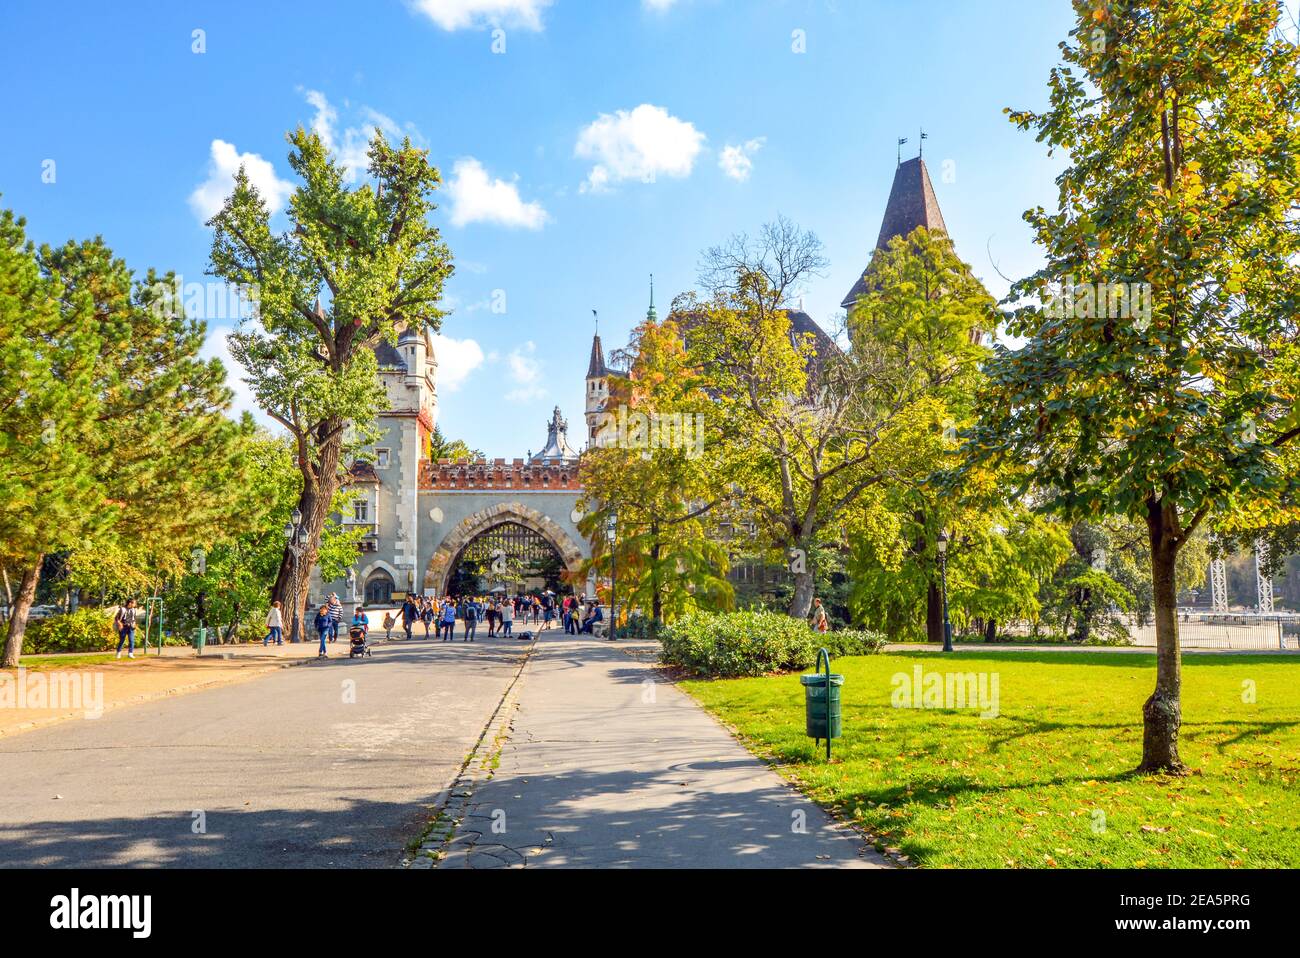 Tourists and local Hungarians enter Vajdahunyad Castle in the City Park of Budapest, Hungary, built in 1896 as part of the Millennial Exhibition. Stock Photo